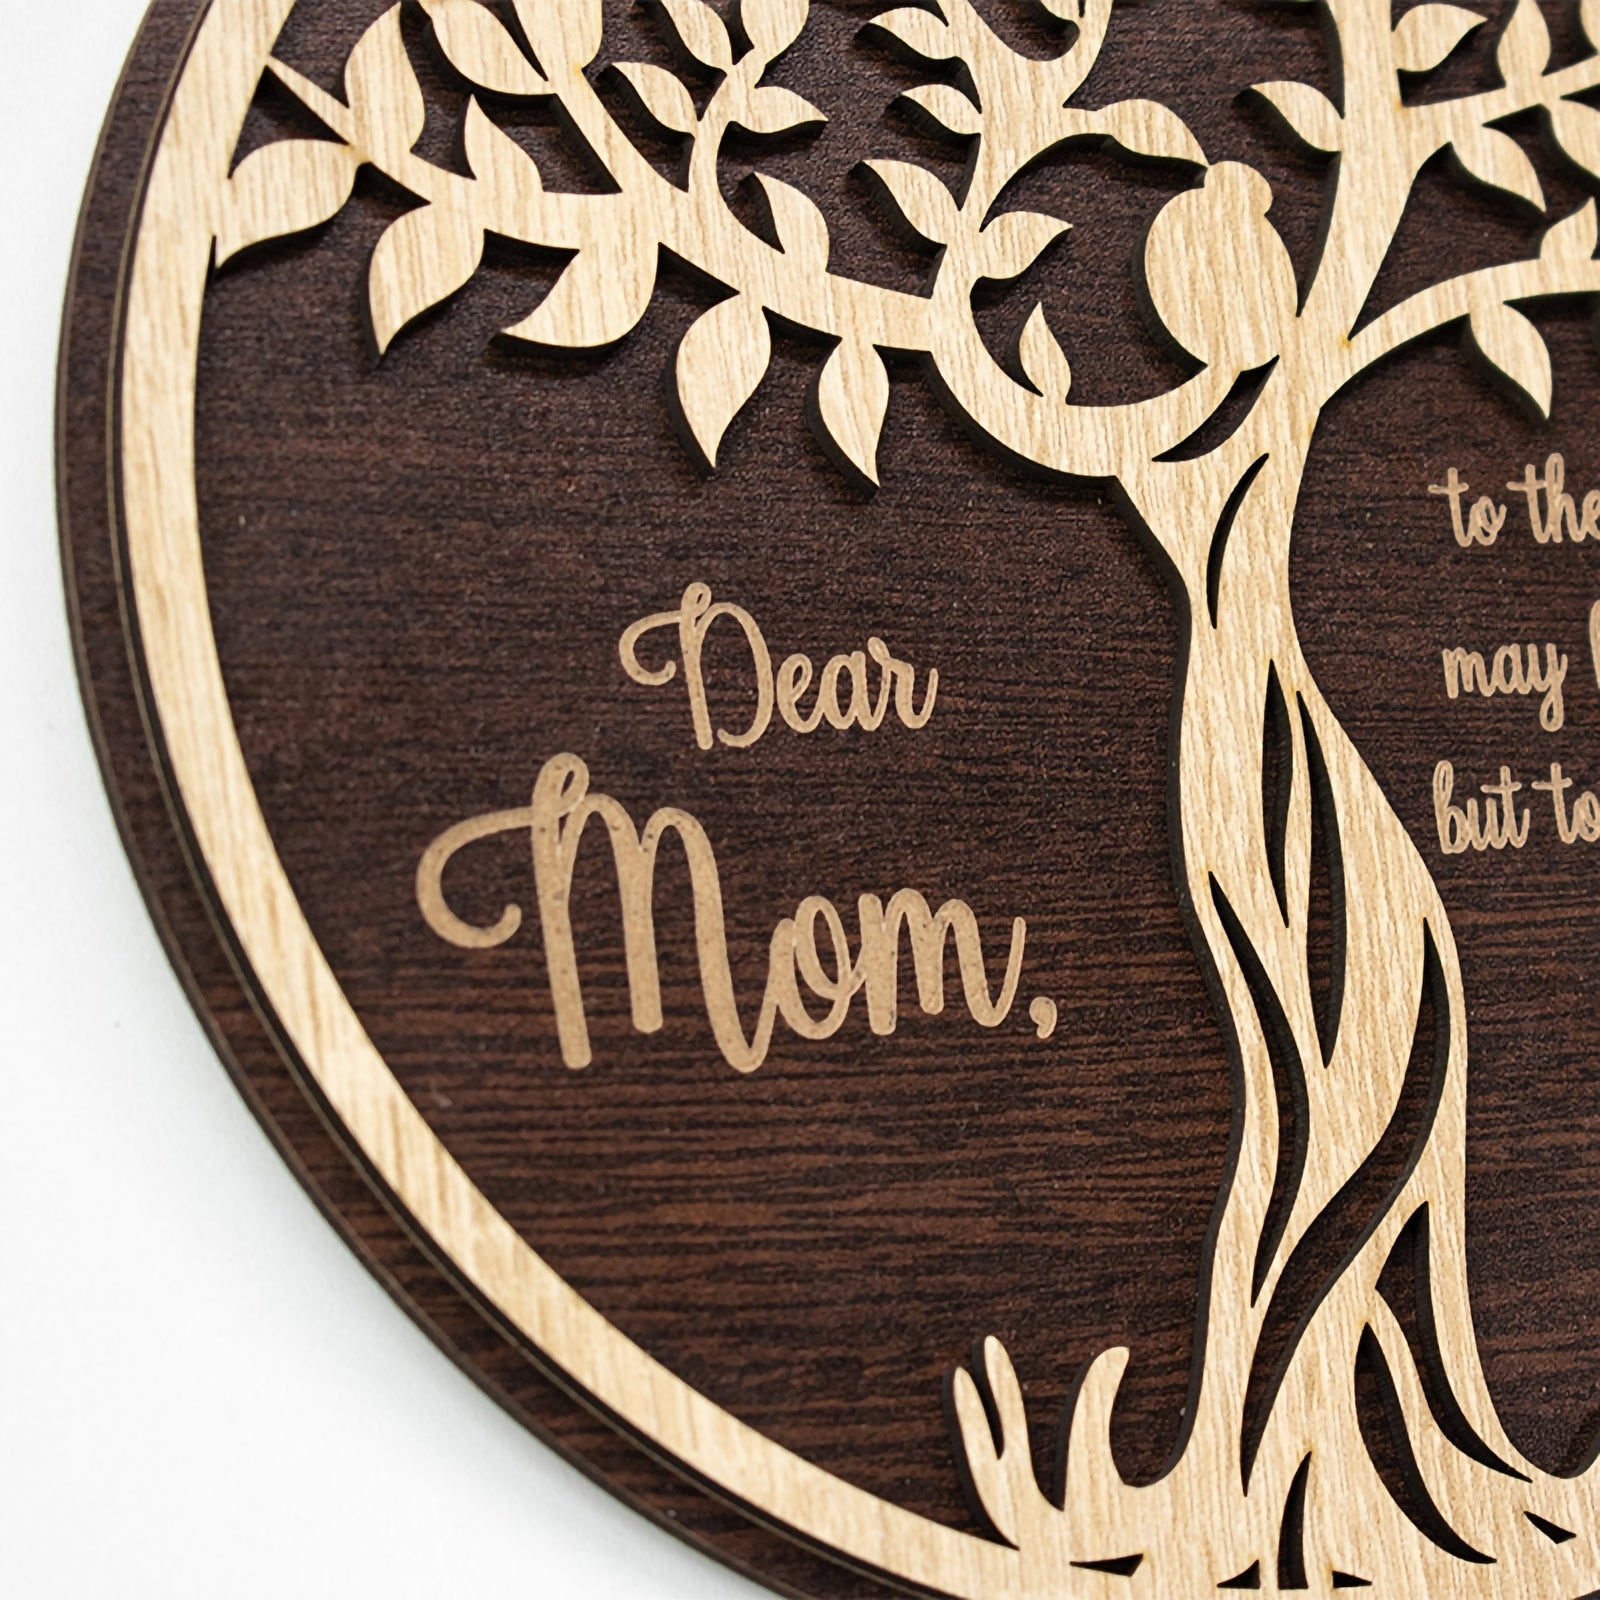 Meaningful Family History and Family Tree Gifts They'll Love